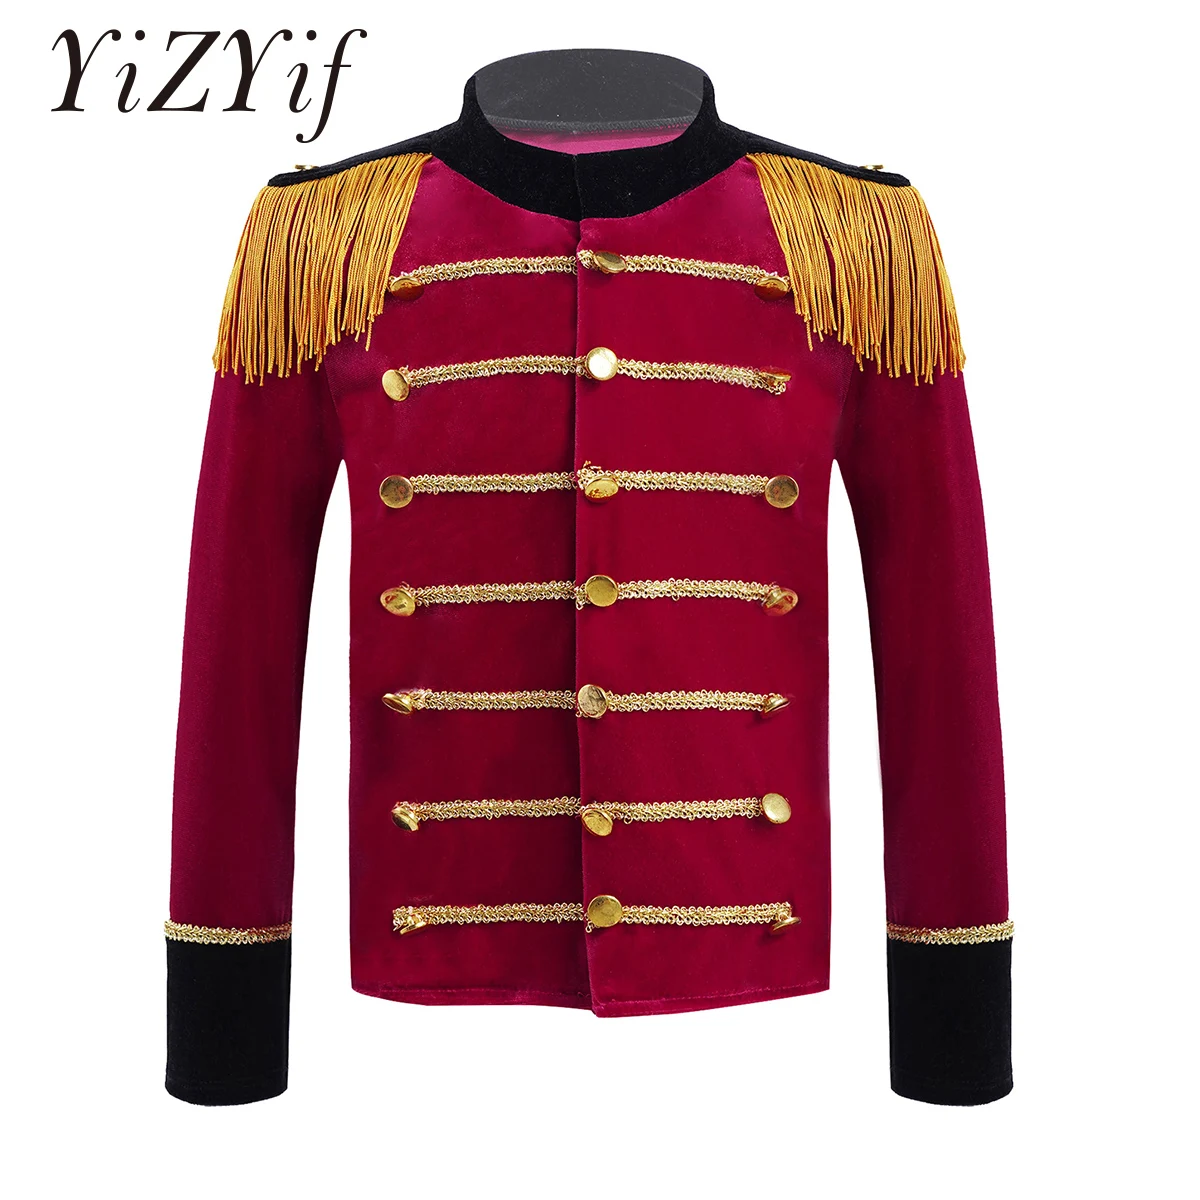 Boy Steampunk Prince Costume Military Tassel Jacket Ringmaster Circus Coat Drum and Trumpet Team Honor Guard Blazer Royal Outfit